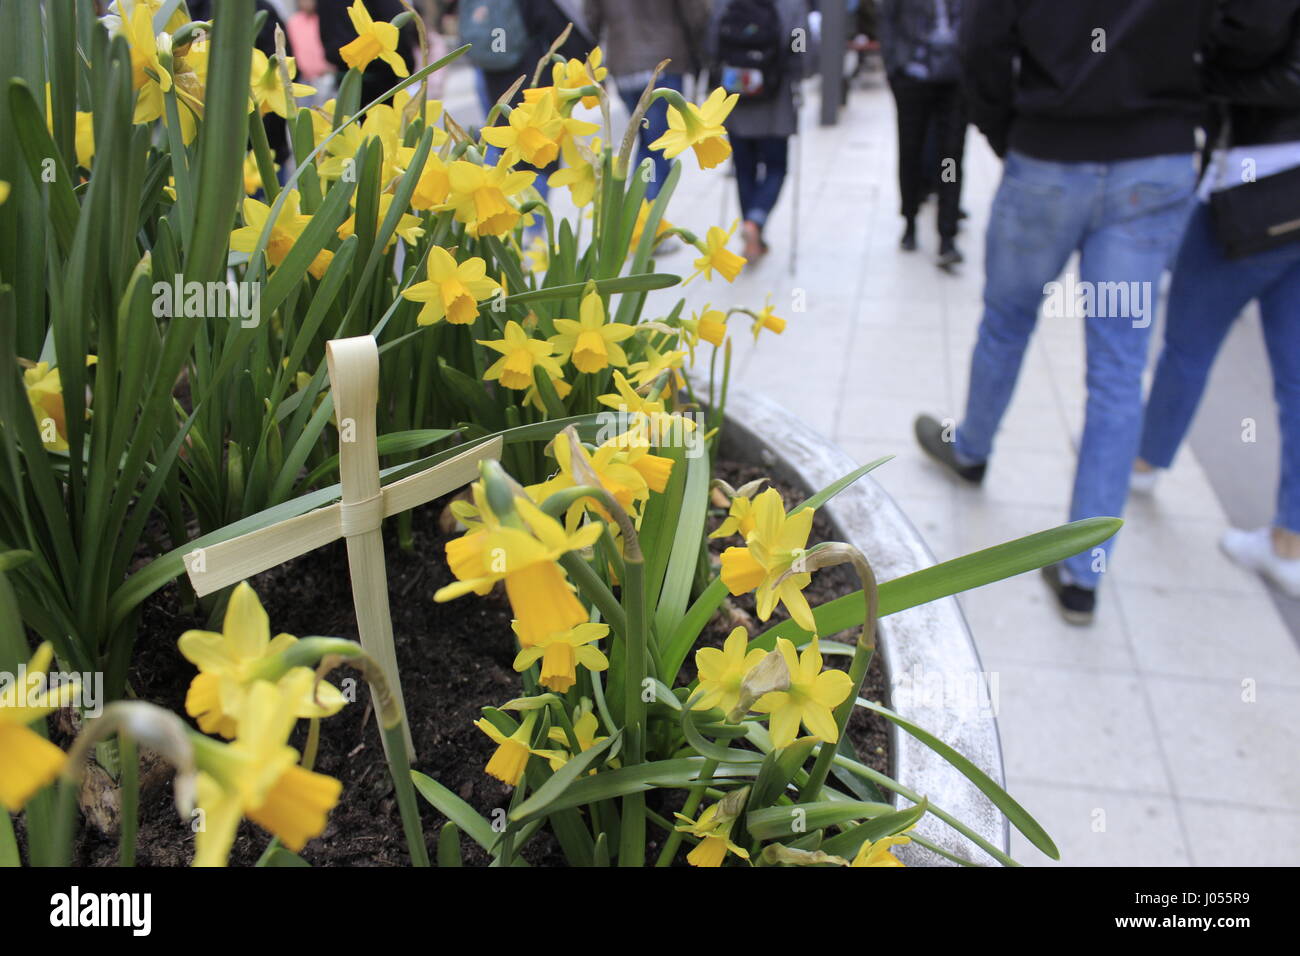 A cross among daffodils planted in a street decorative pot and crowds passing by Drottninggatan street. Stockholm city, Sweden. Stock Photo